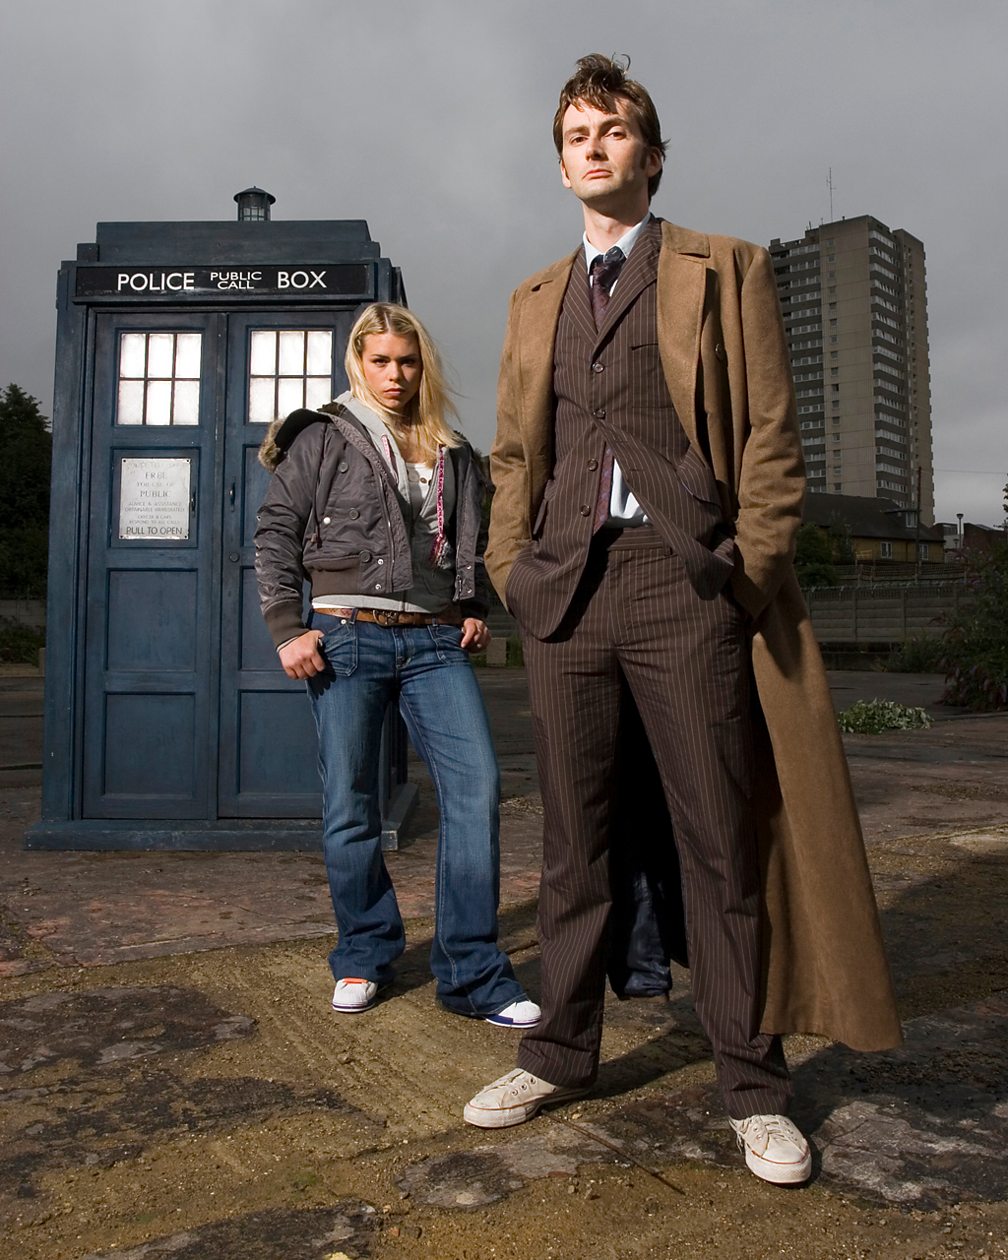 With his pinstriped suit and long coat, David Tennant's "geek chic" reflected styles of the early noughties (Credit: BBC)